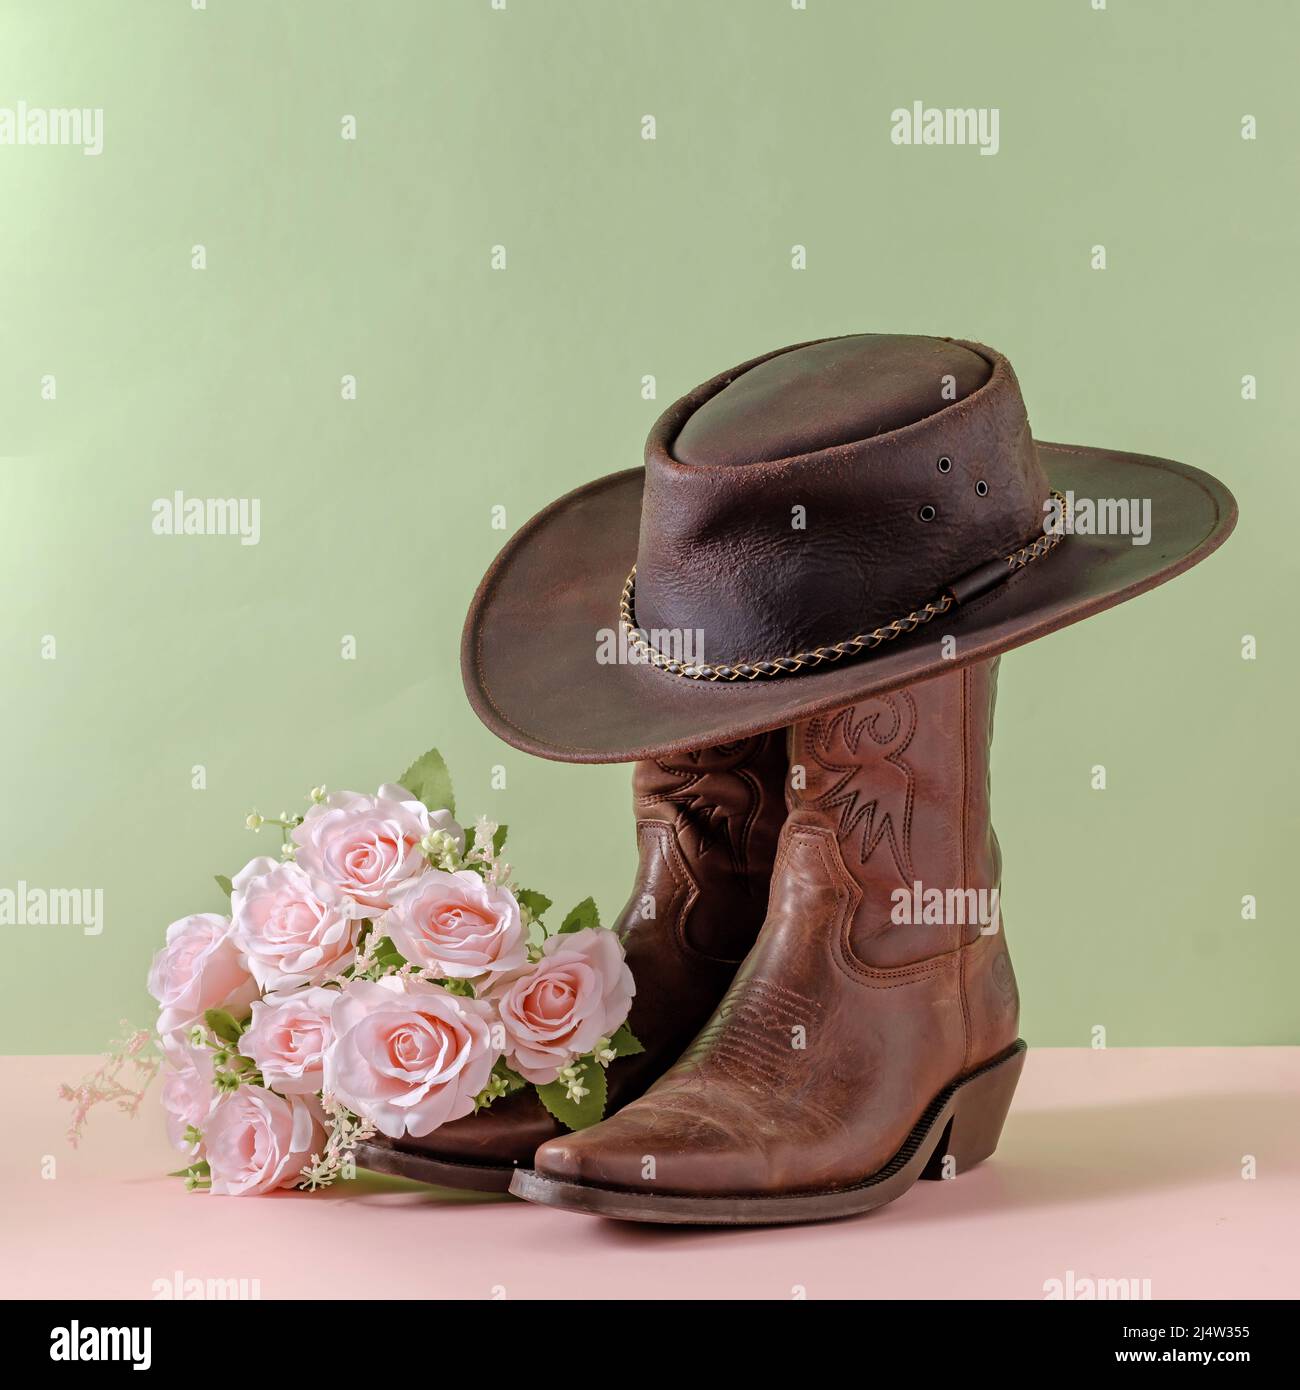 Cowboy boots shoes and hat and bouquet of rose flowers on green background minimal creative concept symbol of wild west america usa texas farm and par Stock Photo